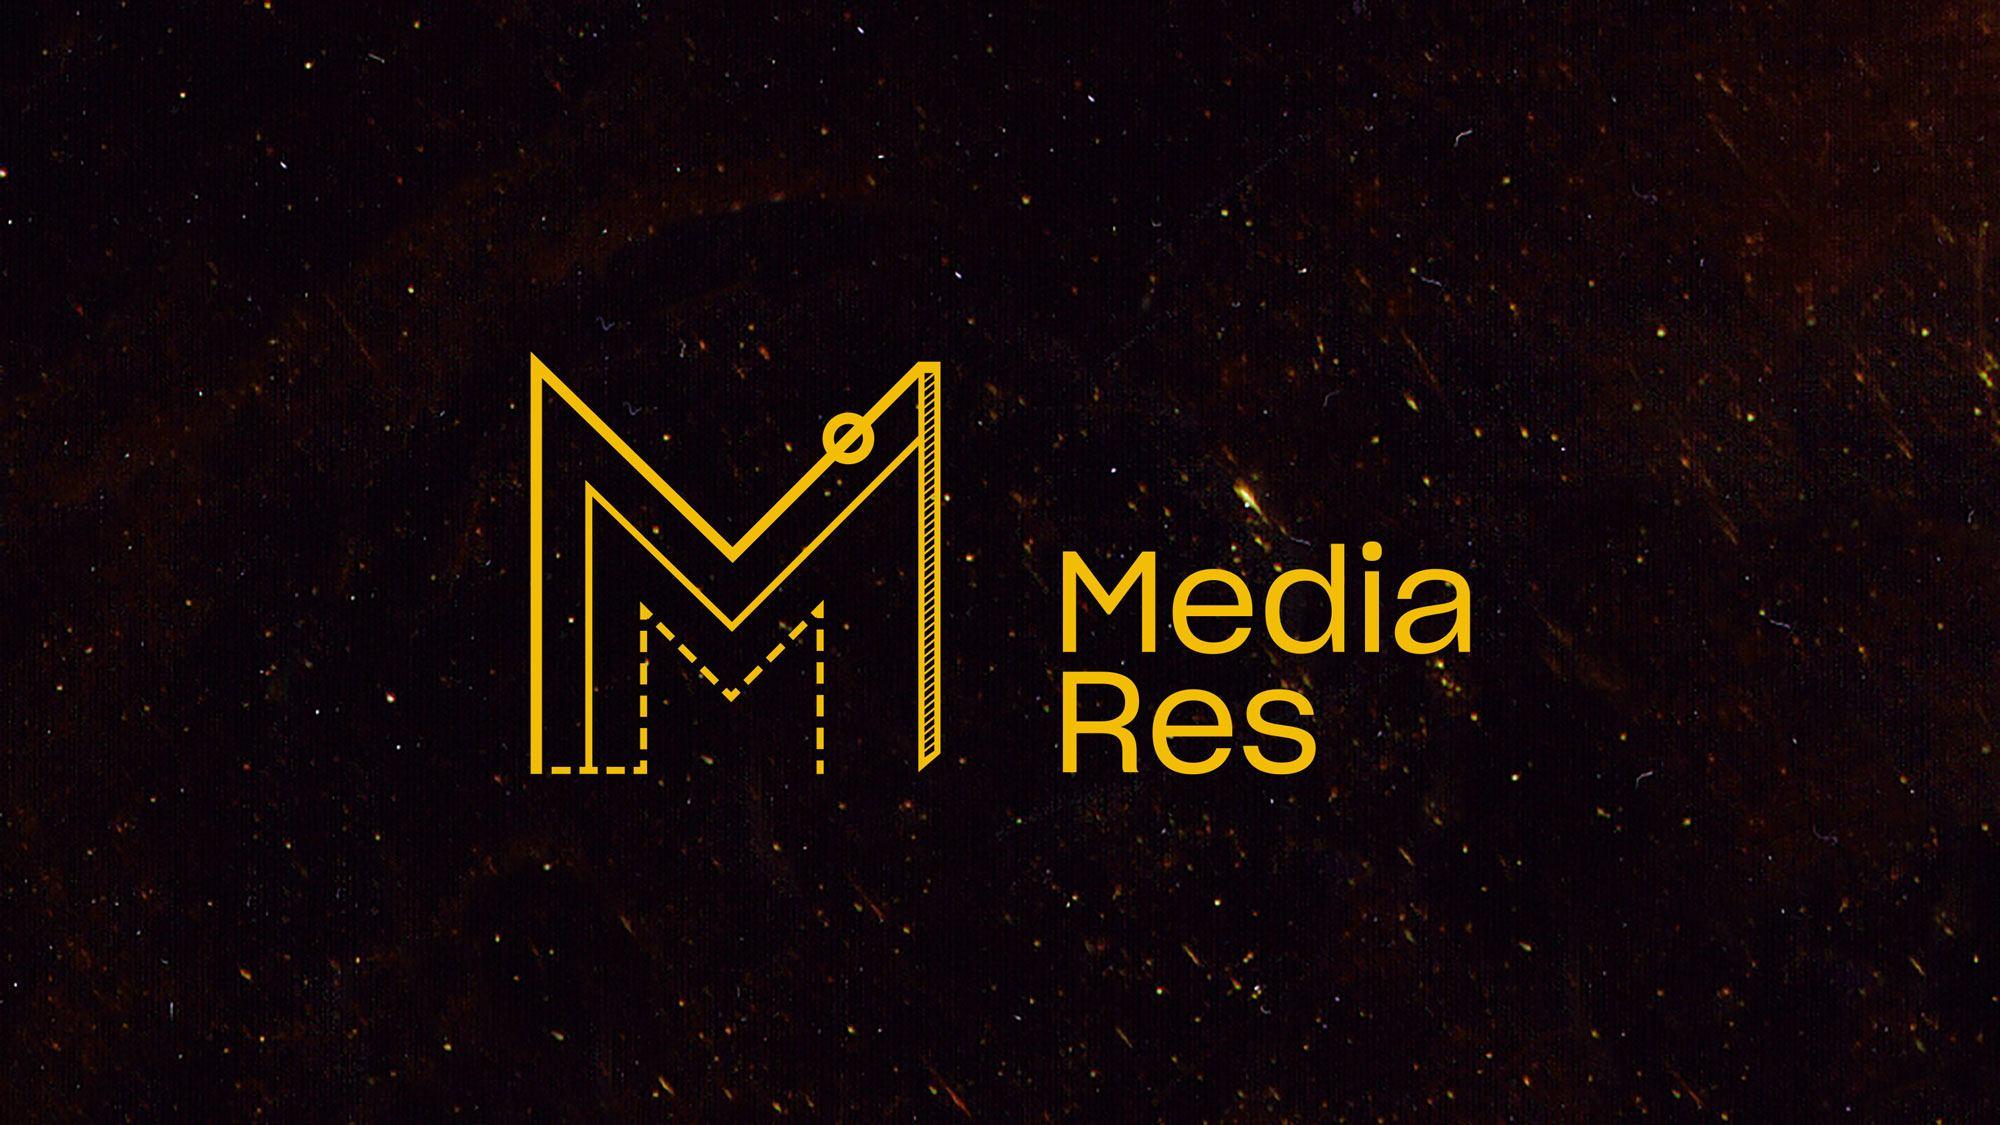 Media Res logo with texture